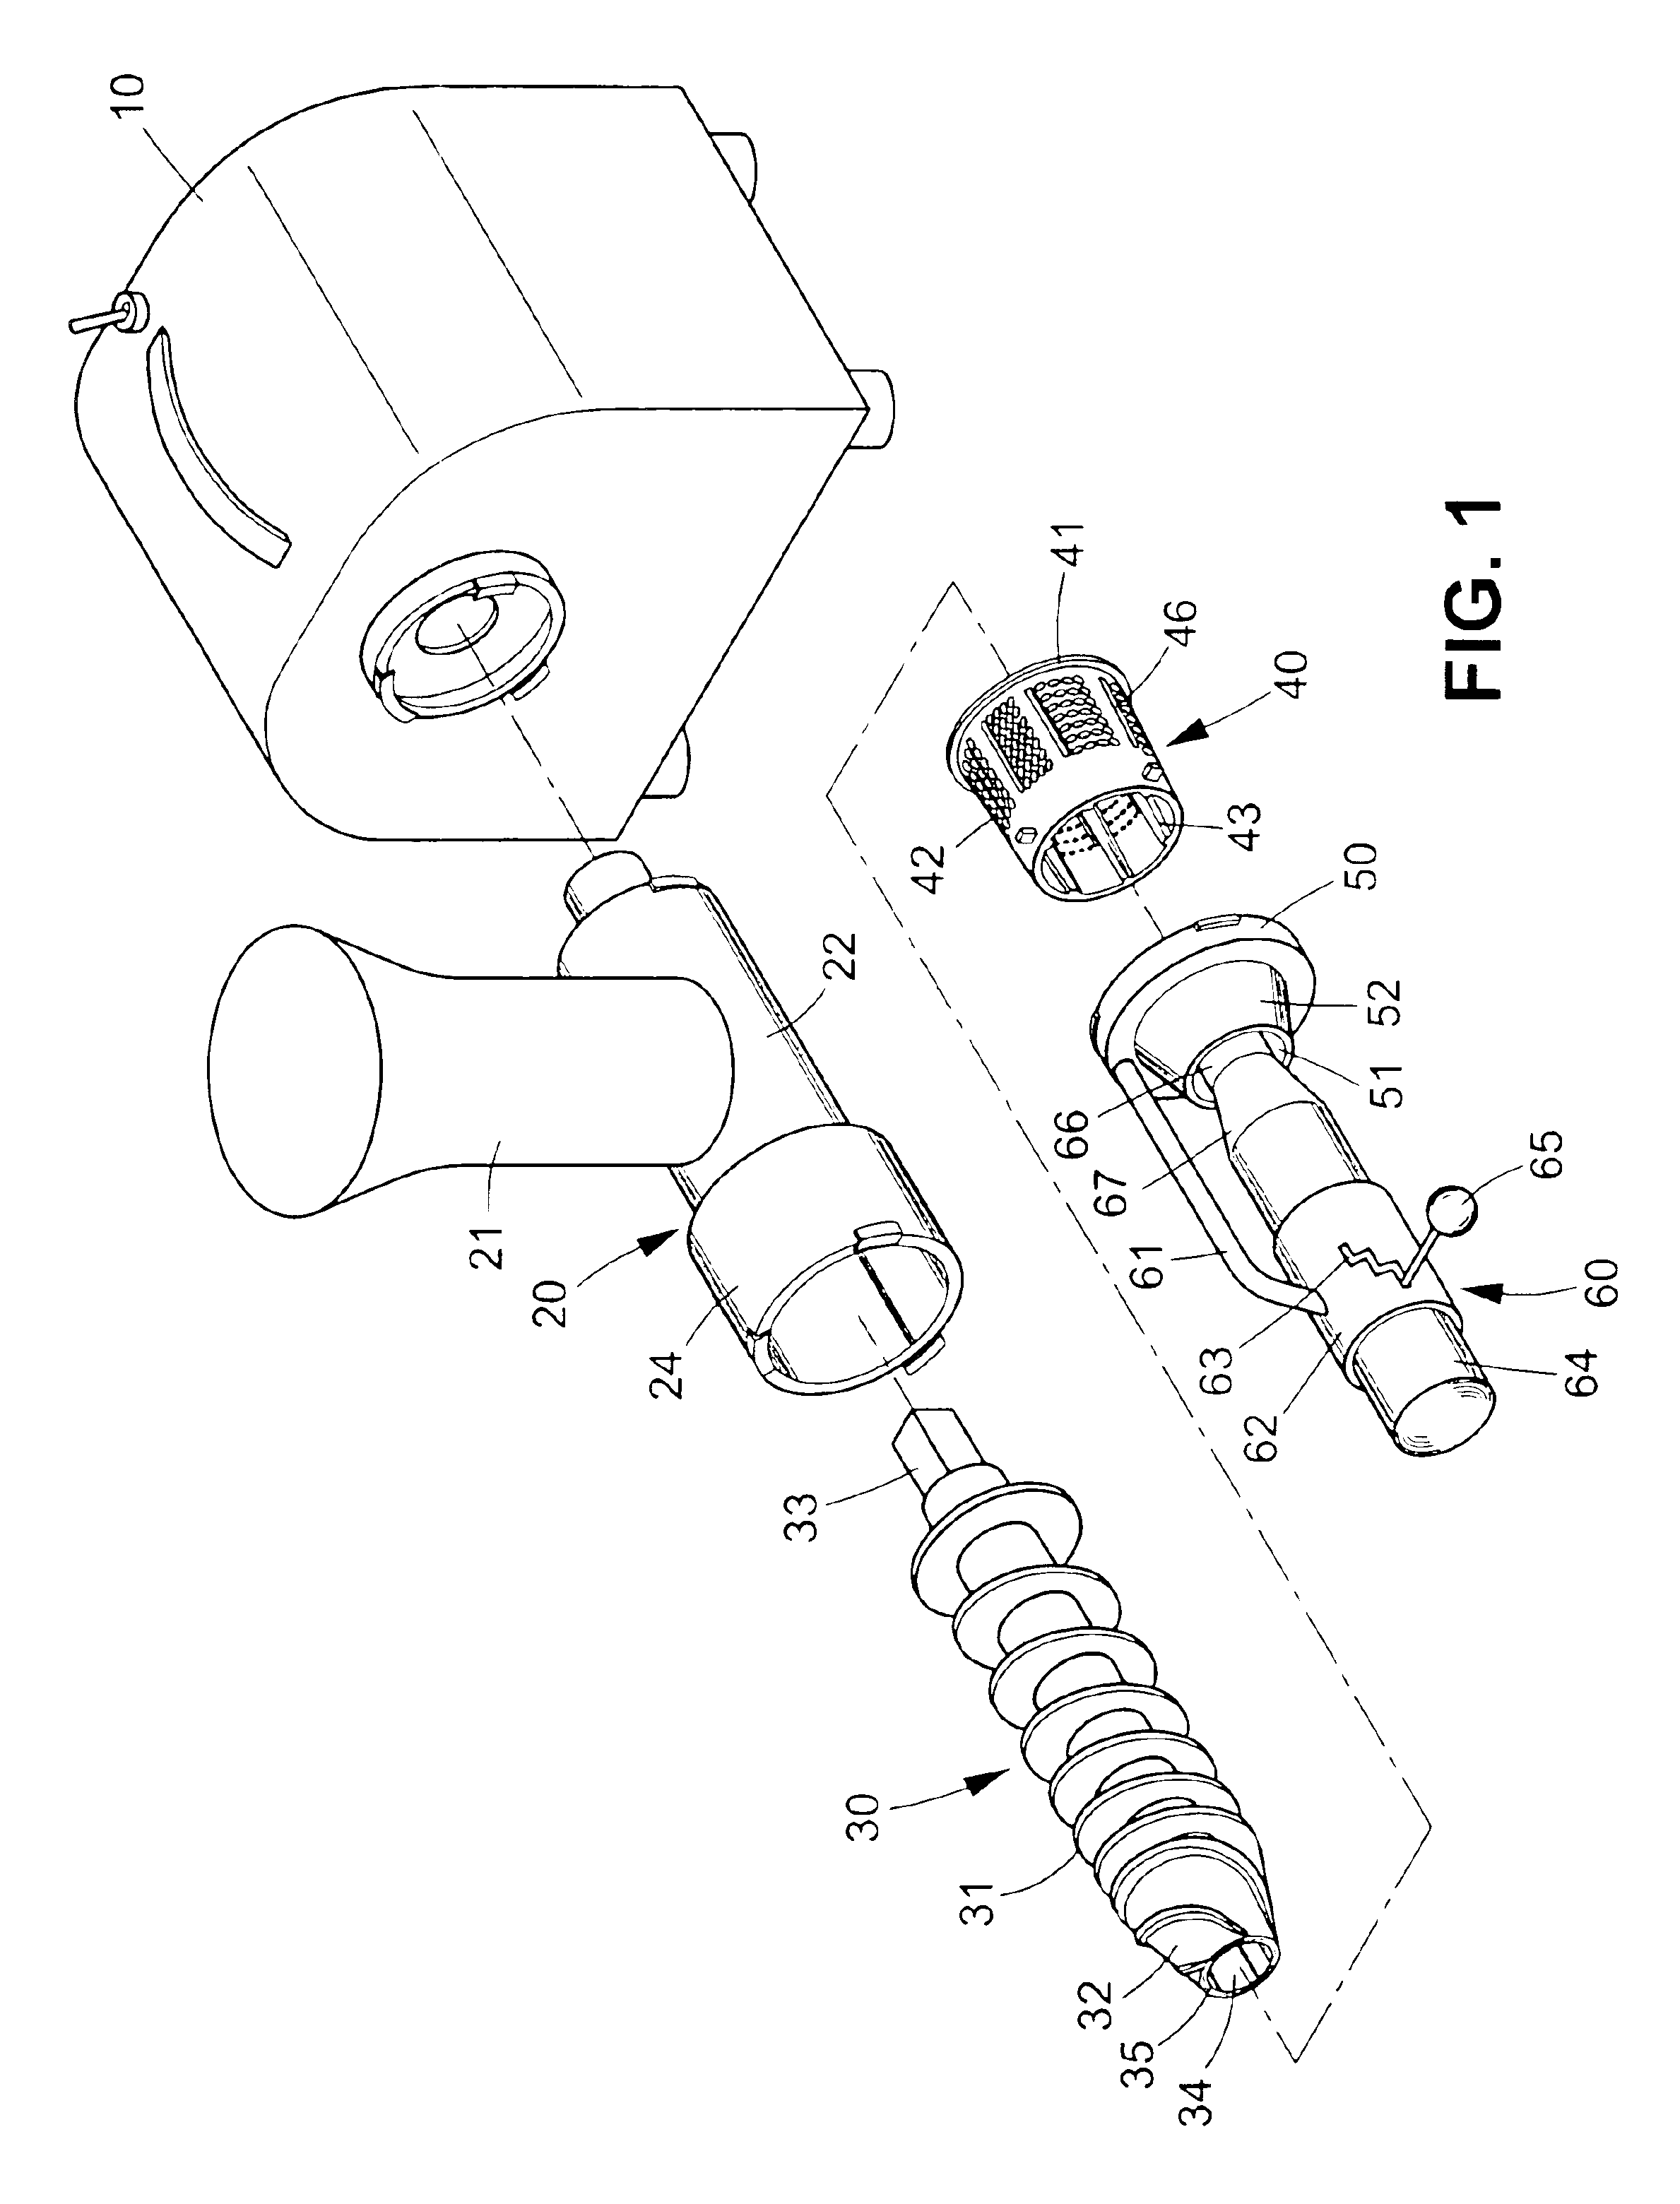 Device for extracting juice from plant